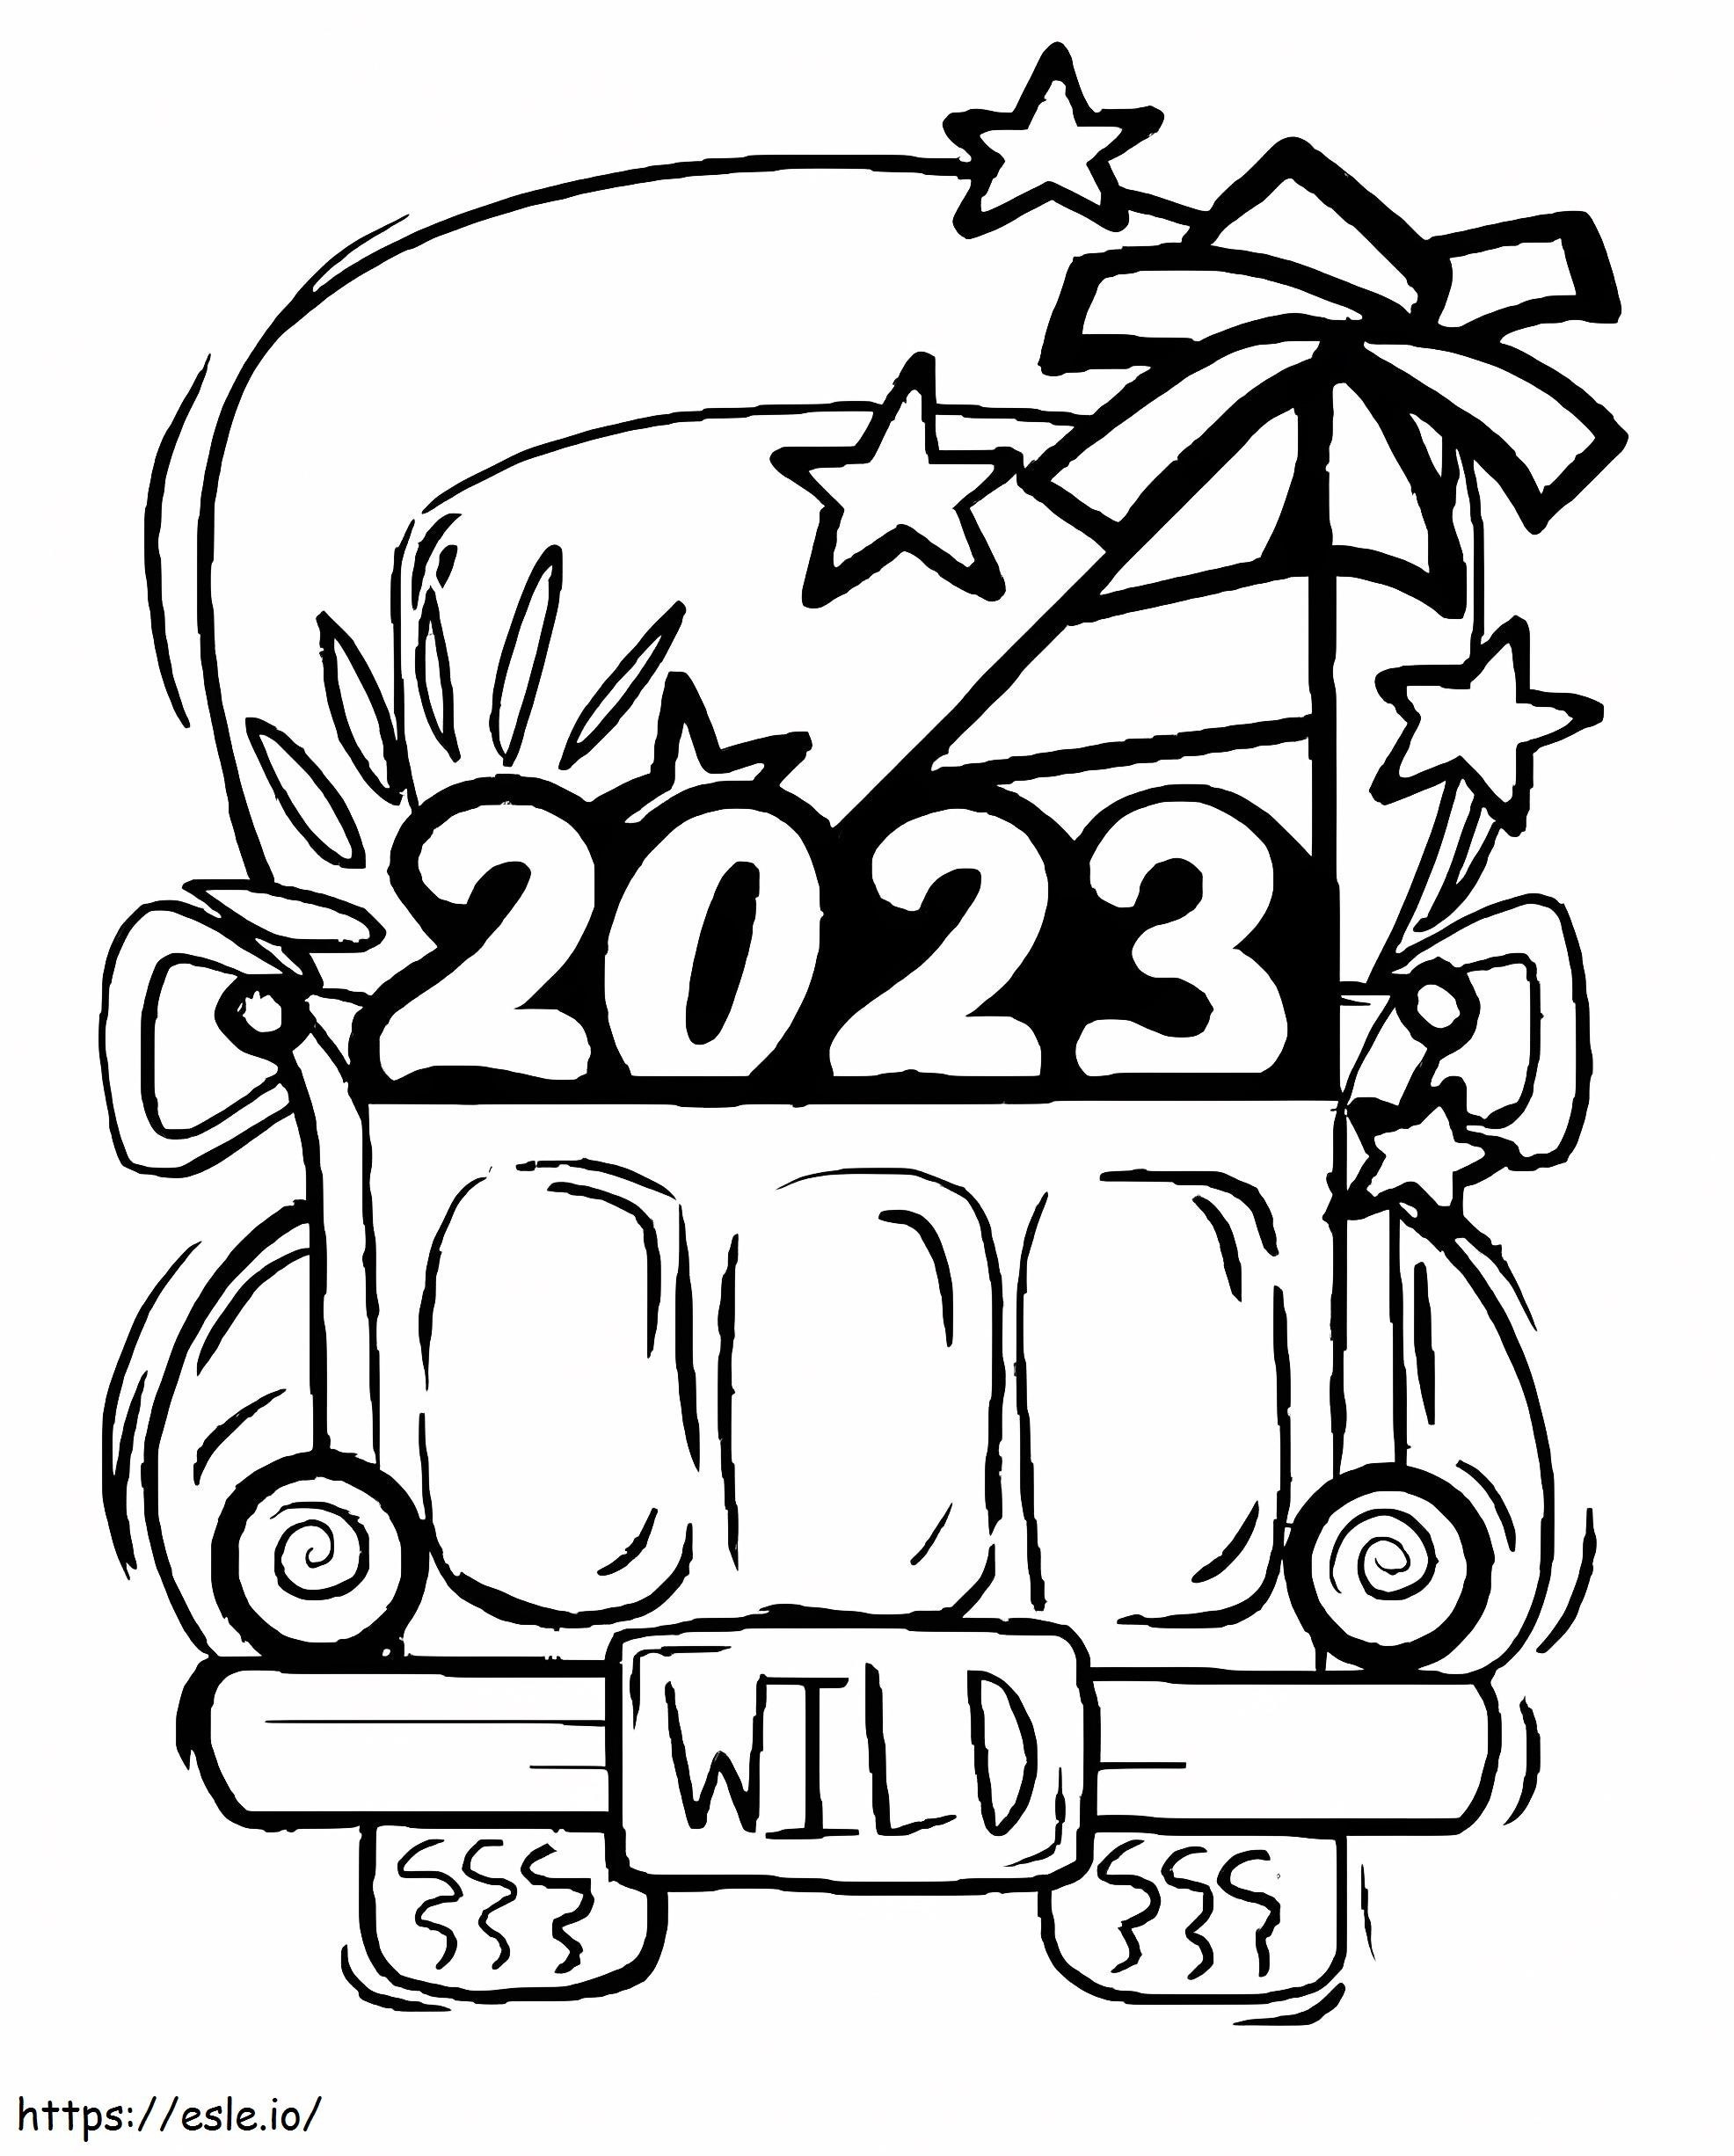 Funny 2023 coloring page